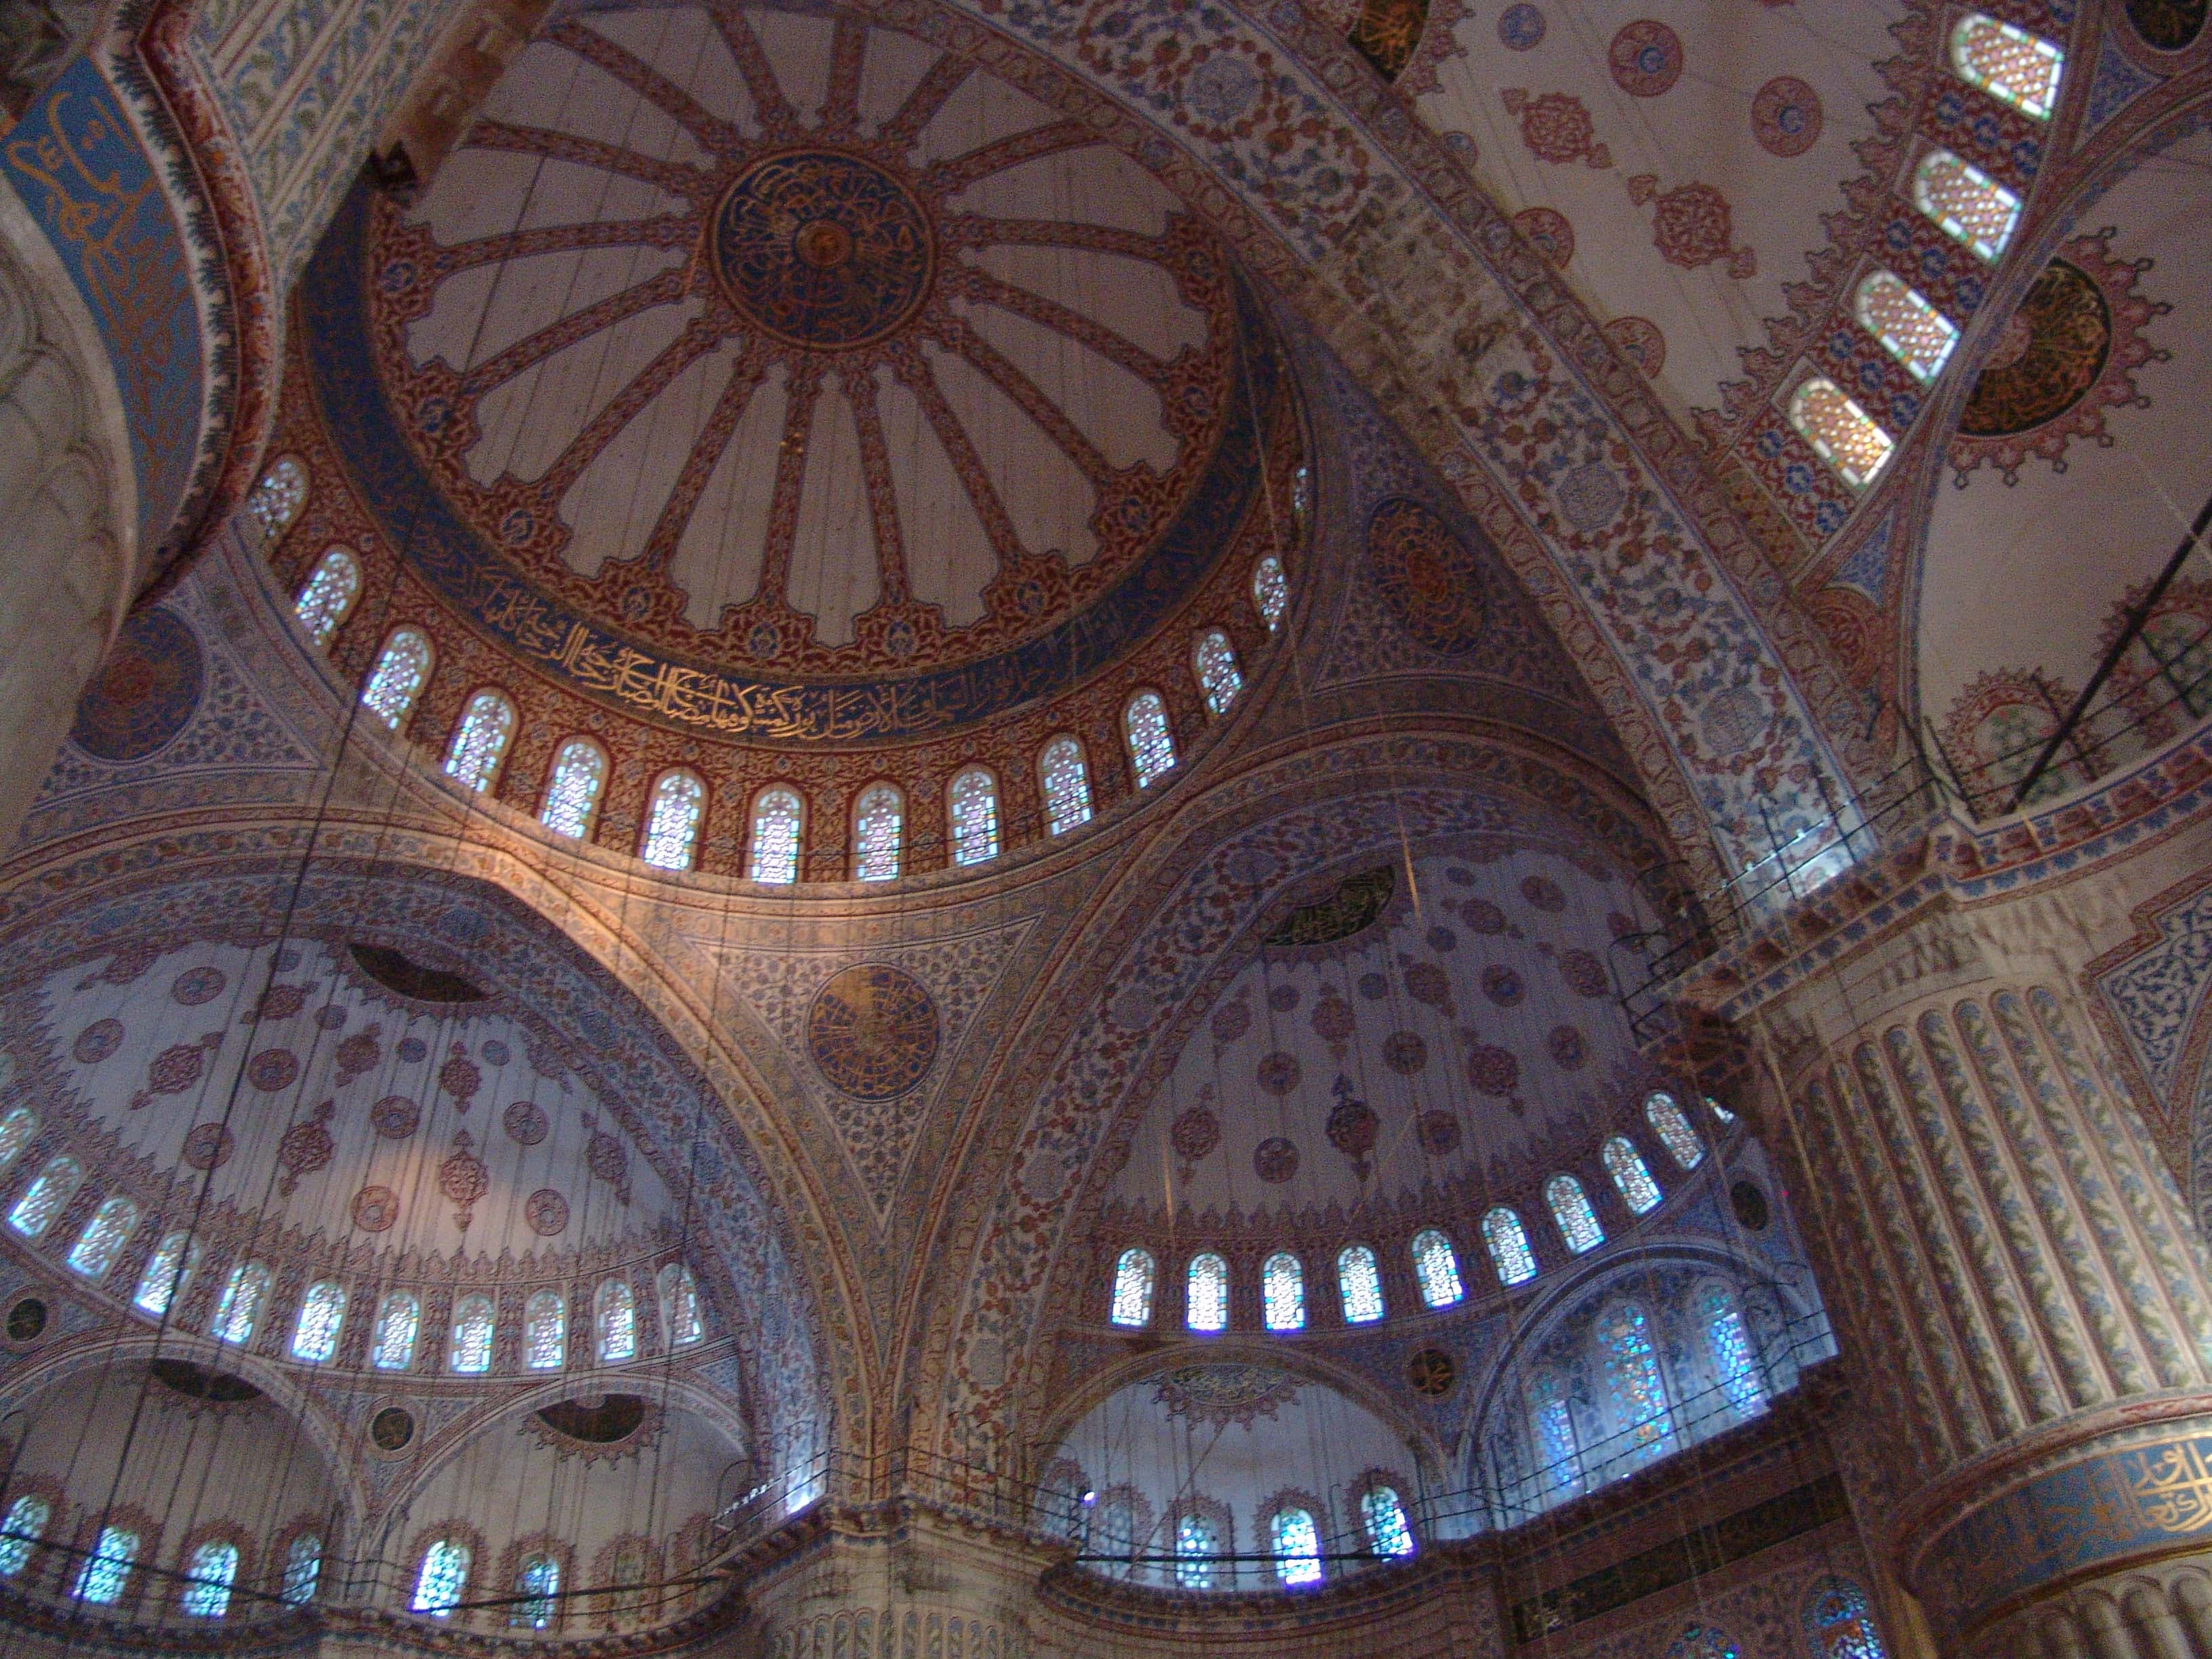 Domes of the Sultan Ahmet Camii (Blue Mosque) in Fatih, Istanbul, Turkey